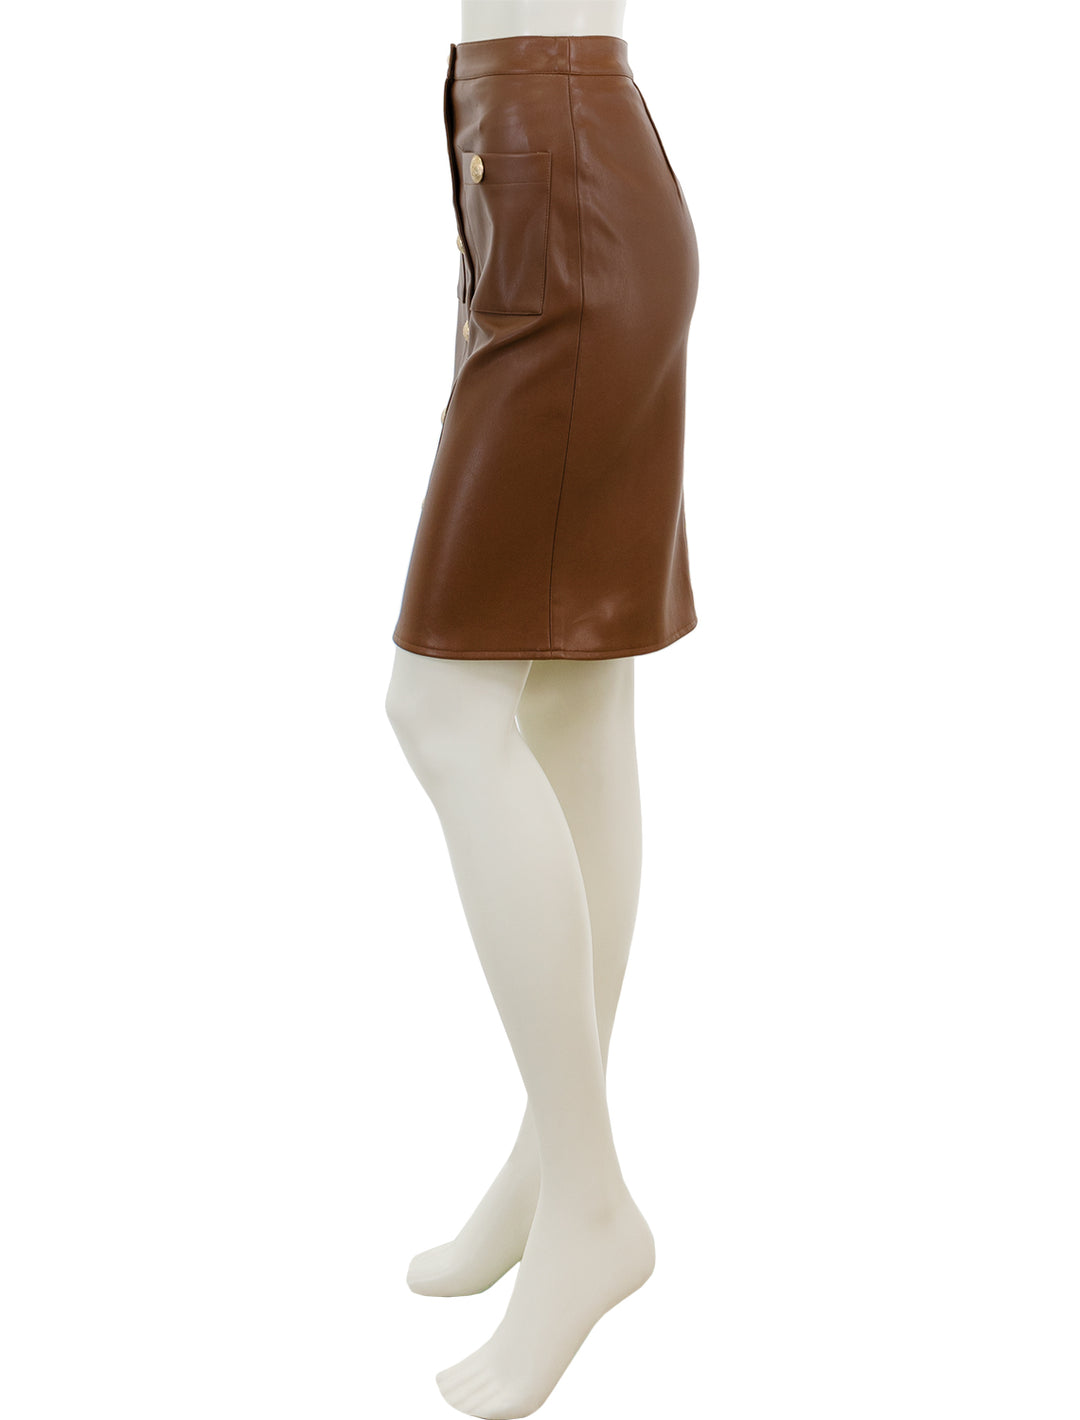 Side view of L'agence's amira pencil skirt in smoky quartz.